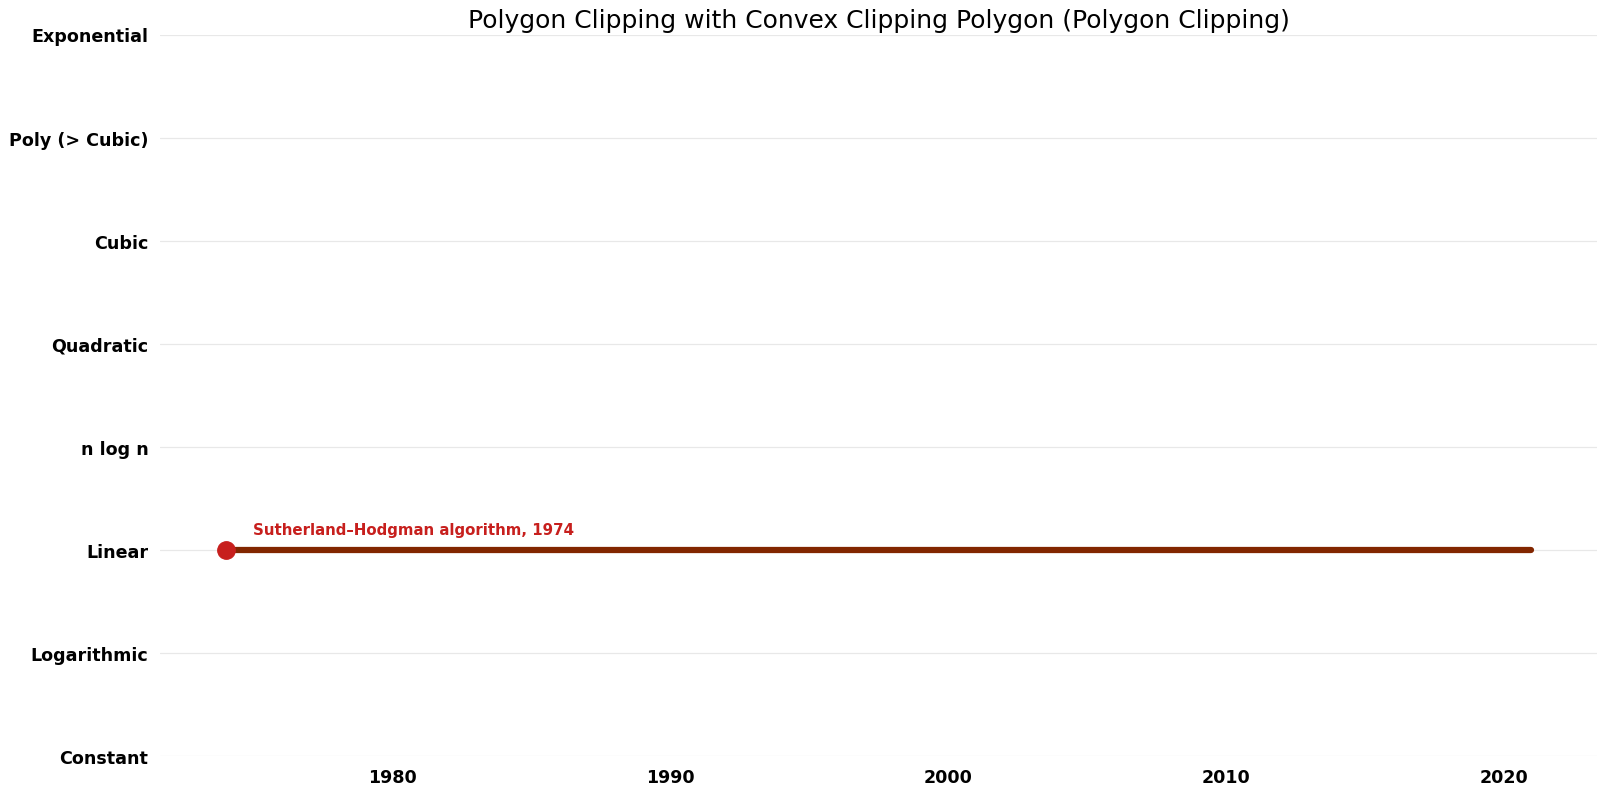 Polygon Clipping - Polygon Clipping with Convex Clipping Polygon - Space.png